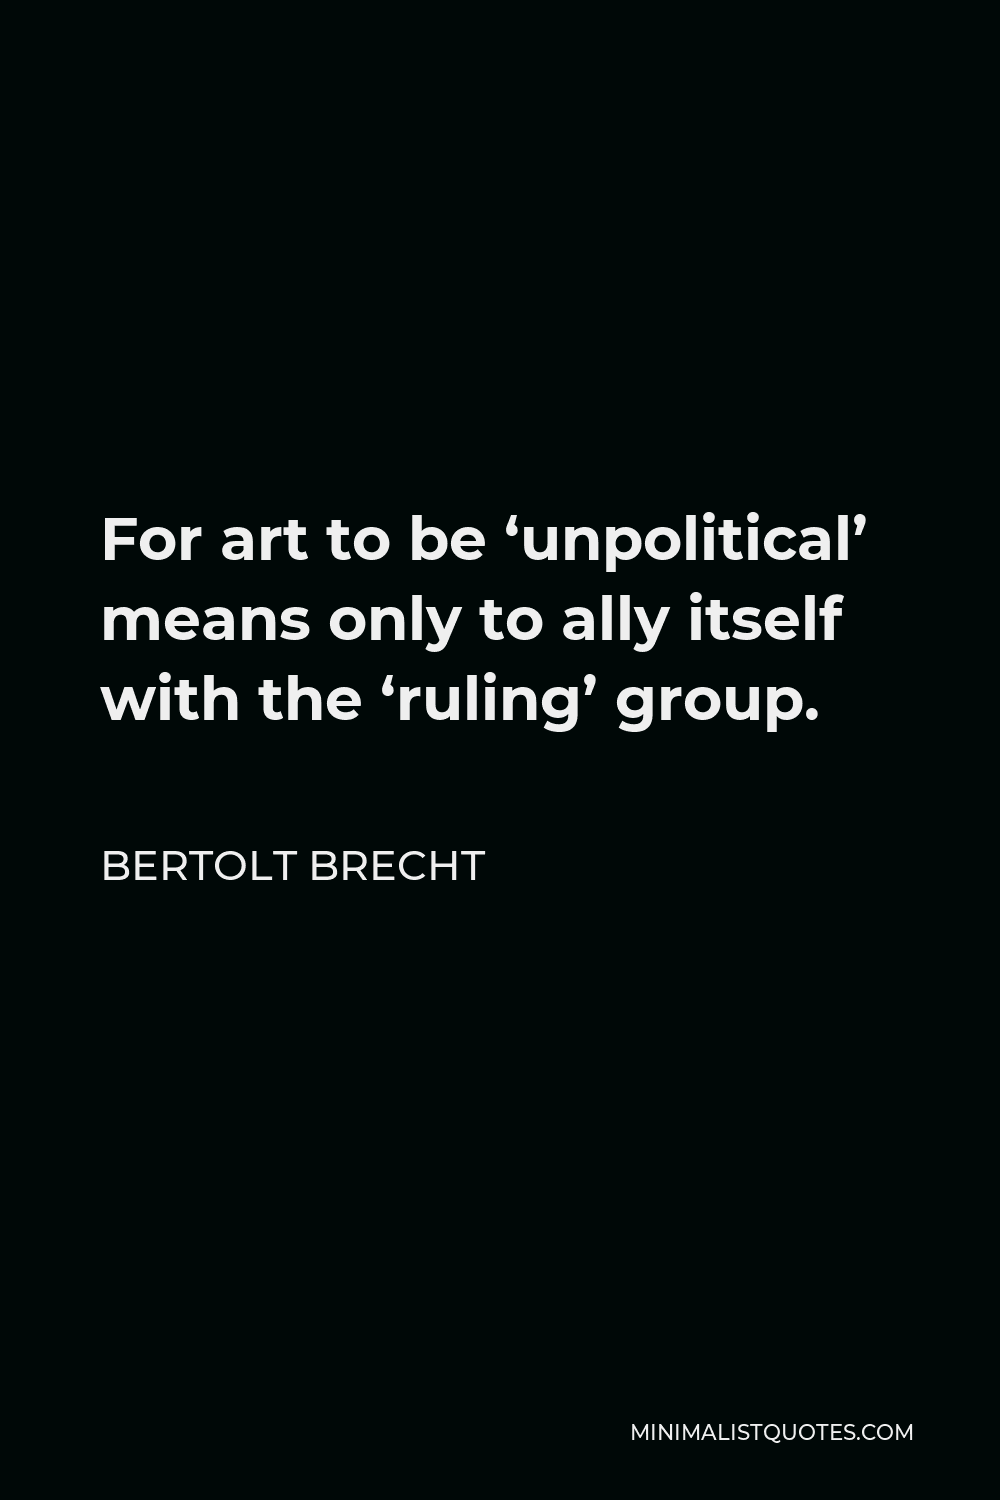 Bertolt Brecht Quote - For art to be ‘unpolitical’ means only to ally itself with the ‘ruling’ group.